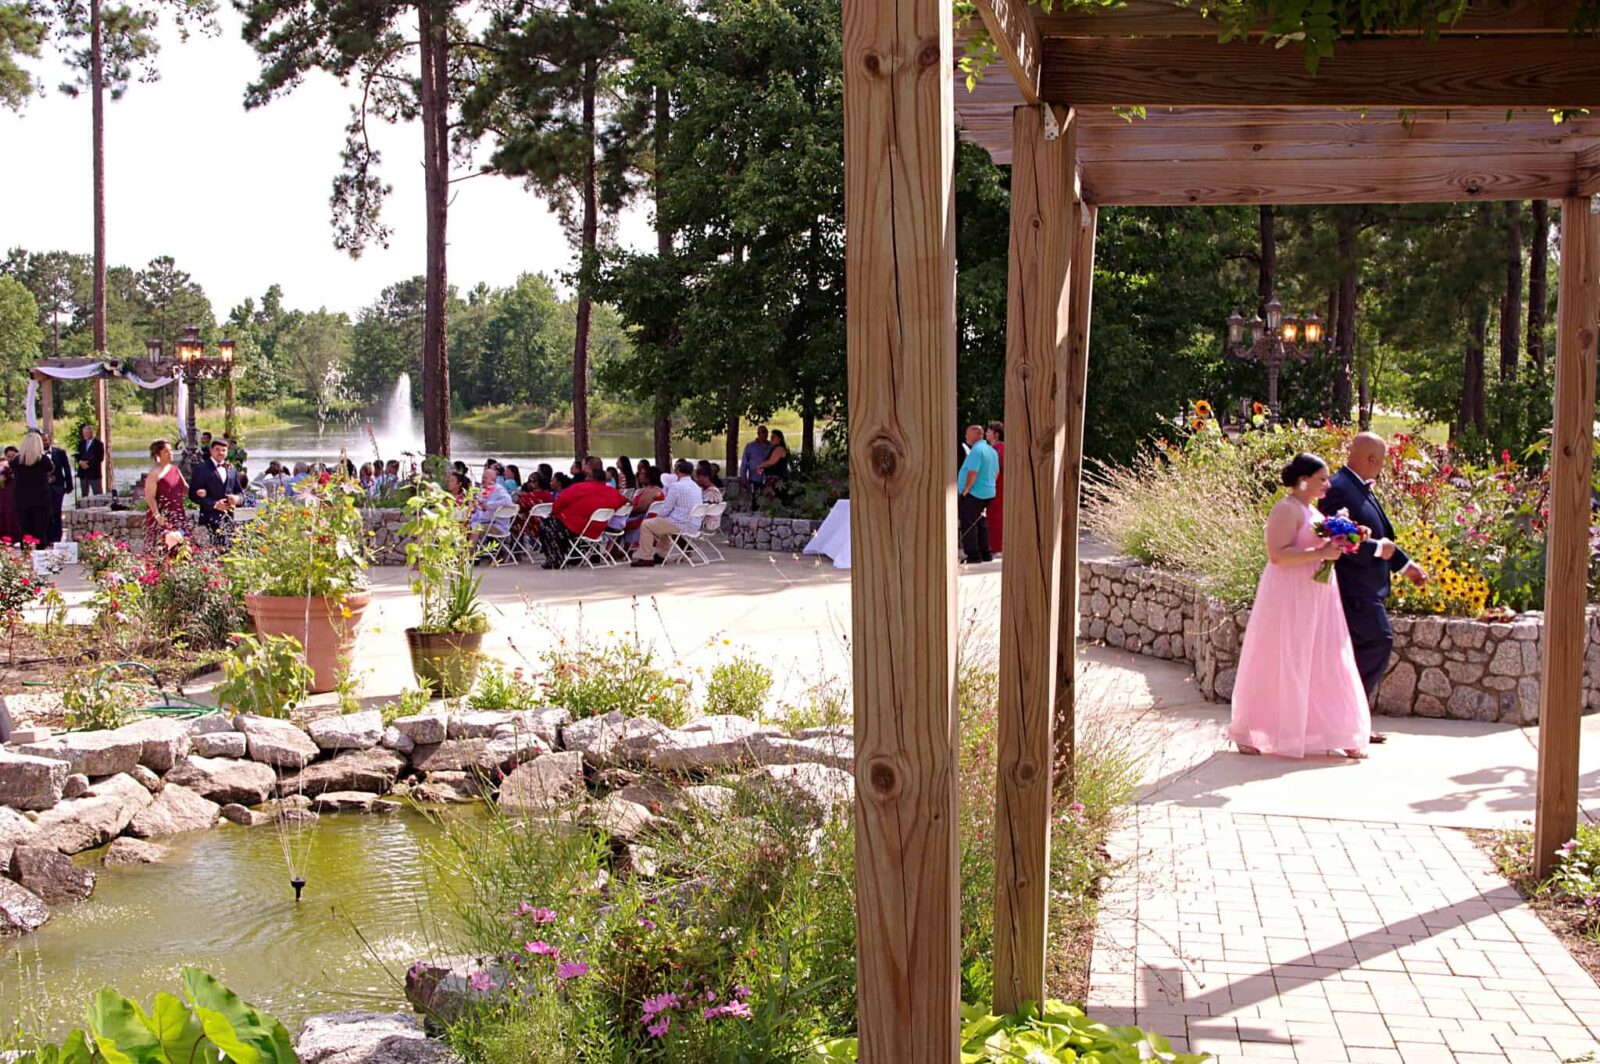 A couple in pink dress standing next to pond.